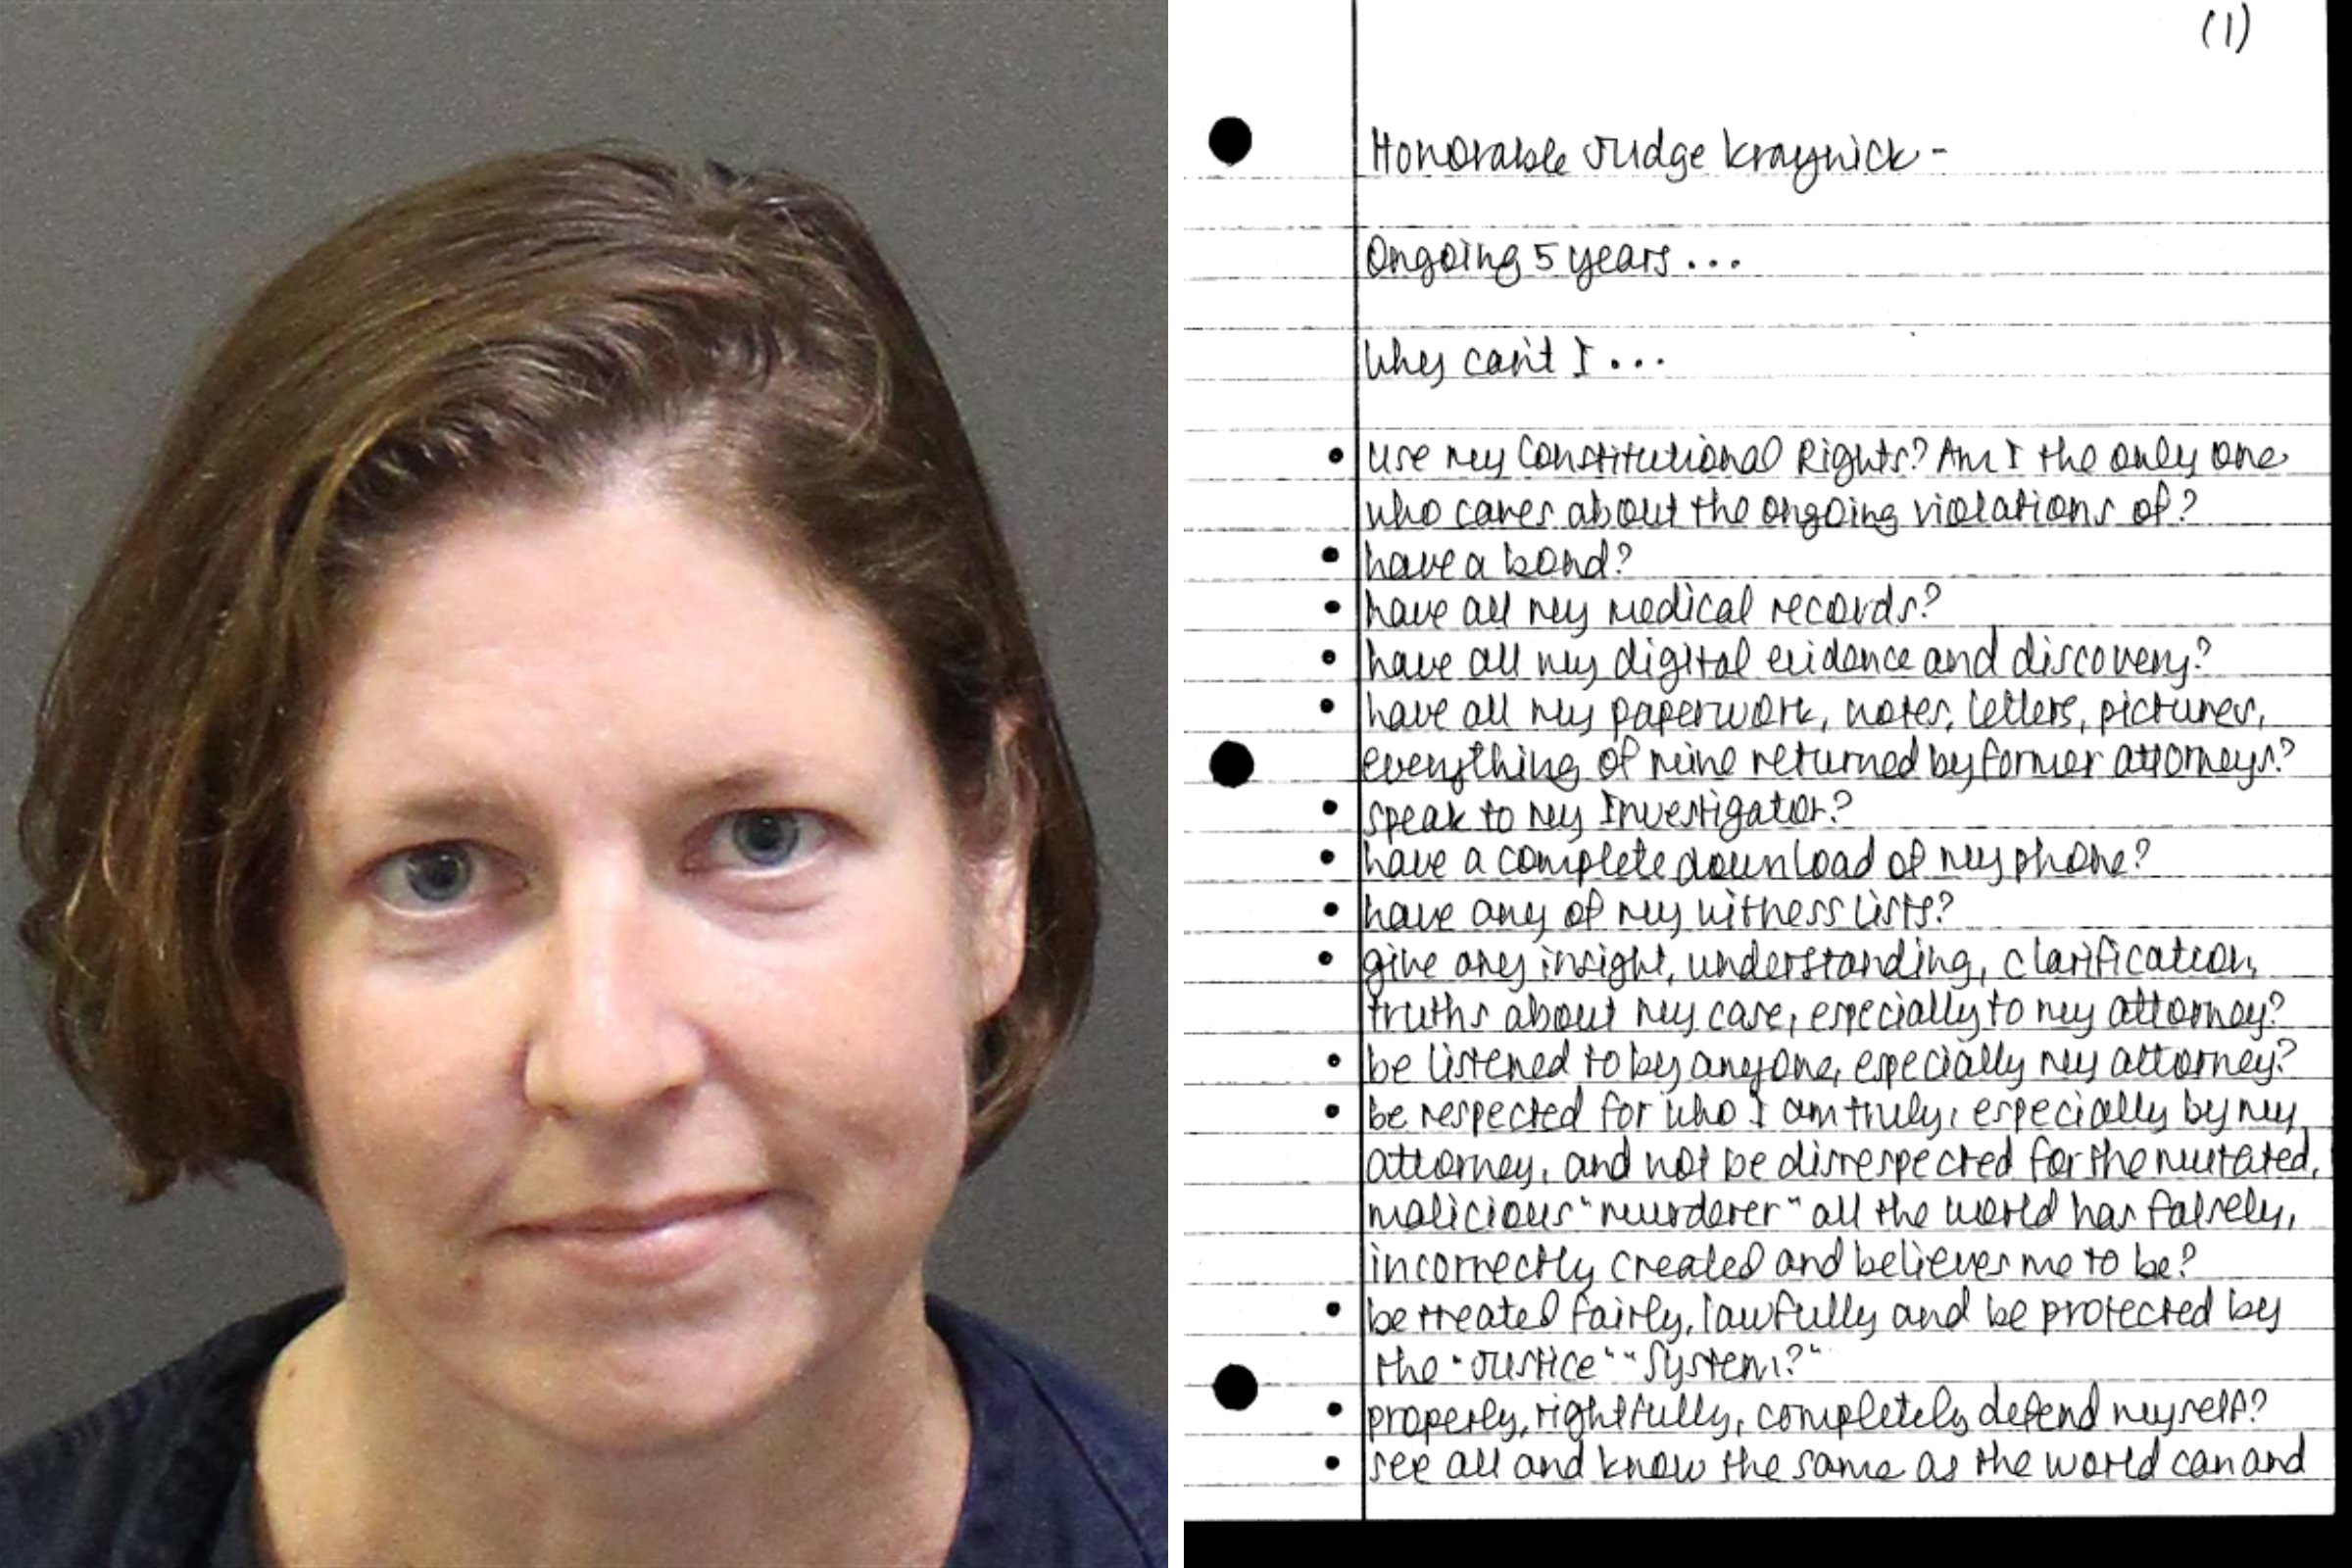 Accused boyfriend killer Sarah Boone's letters from jail: 'Mistreatment'